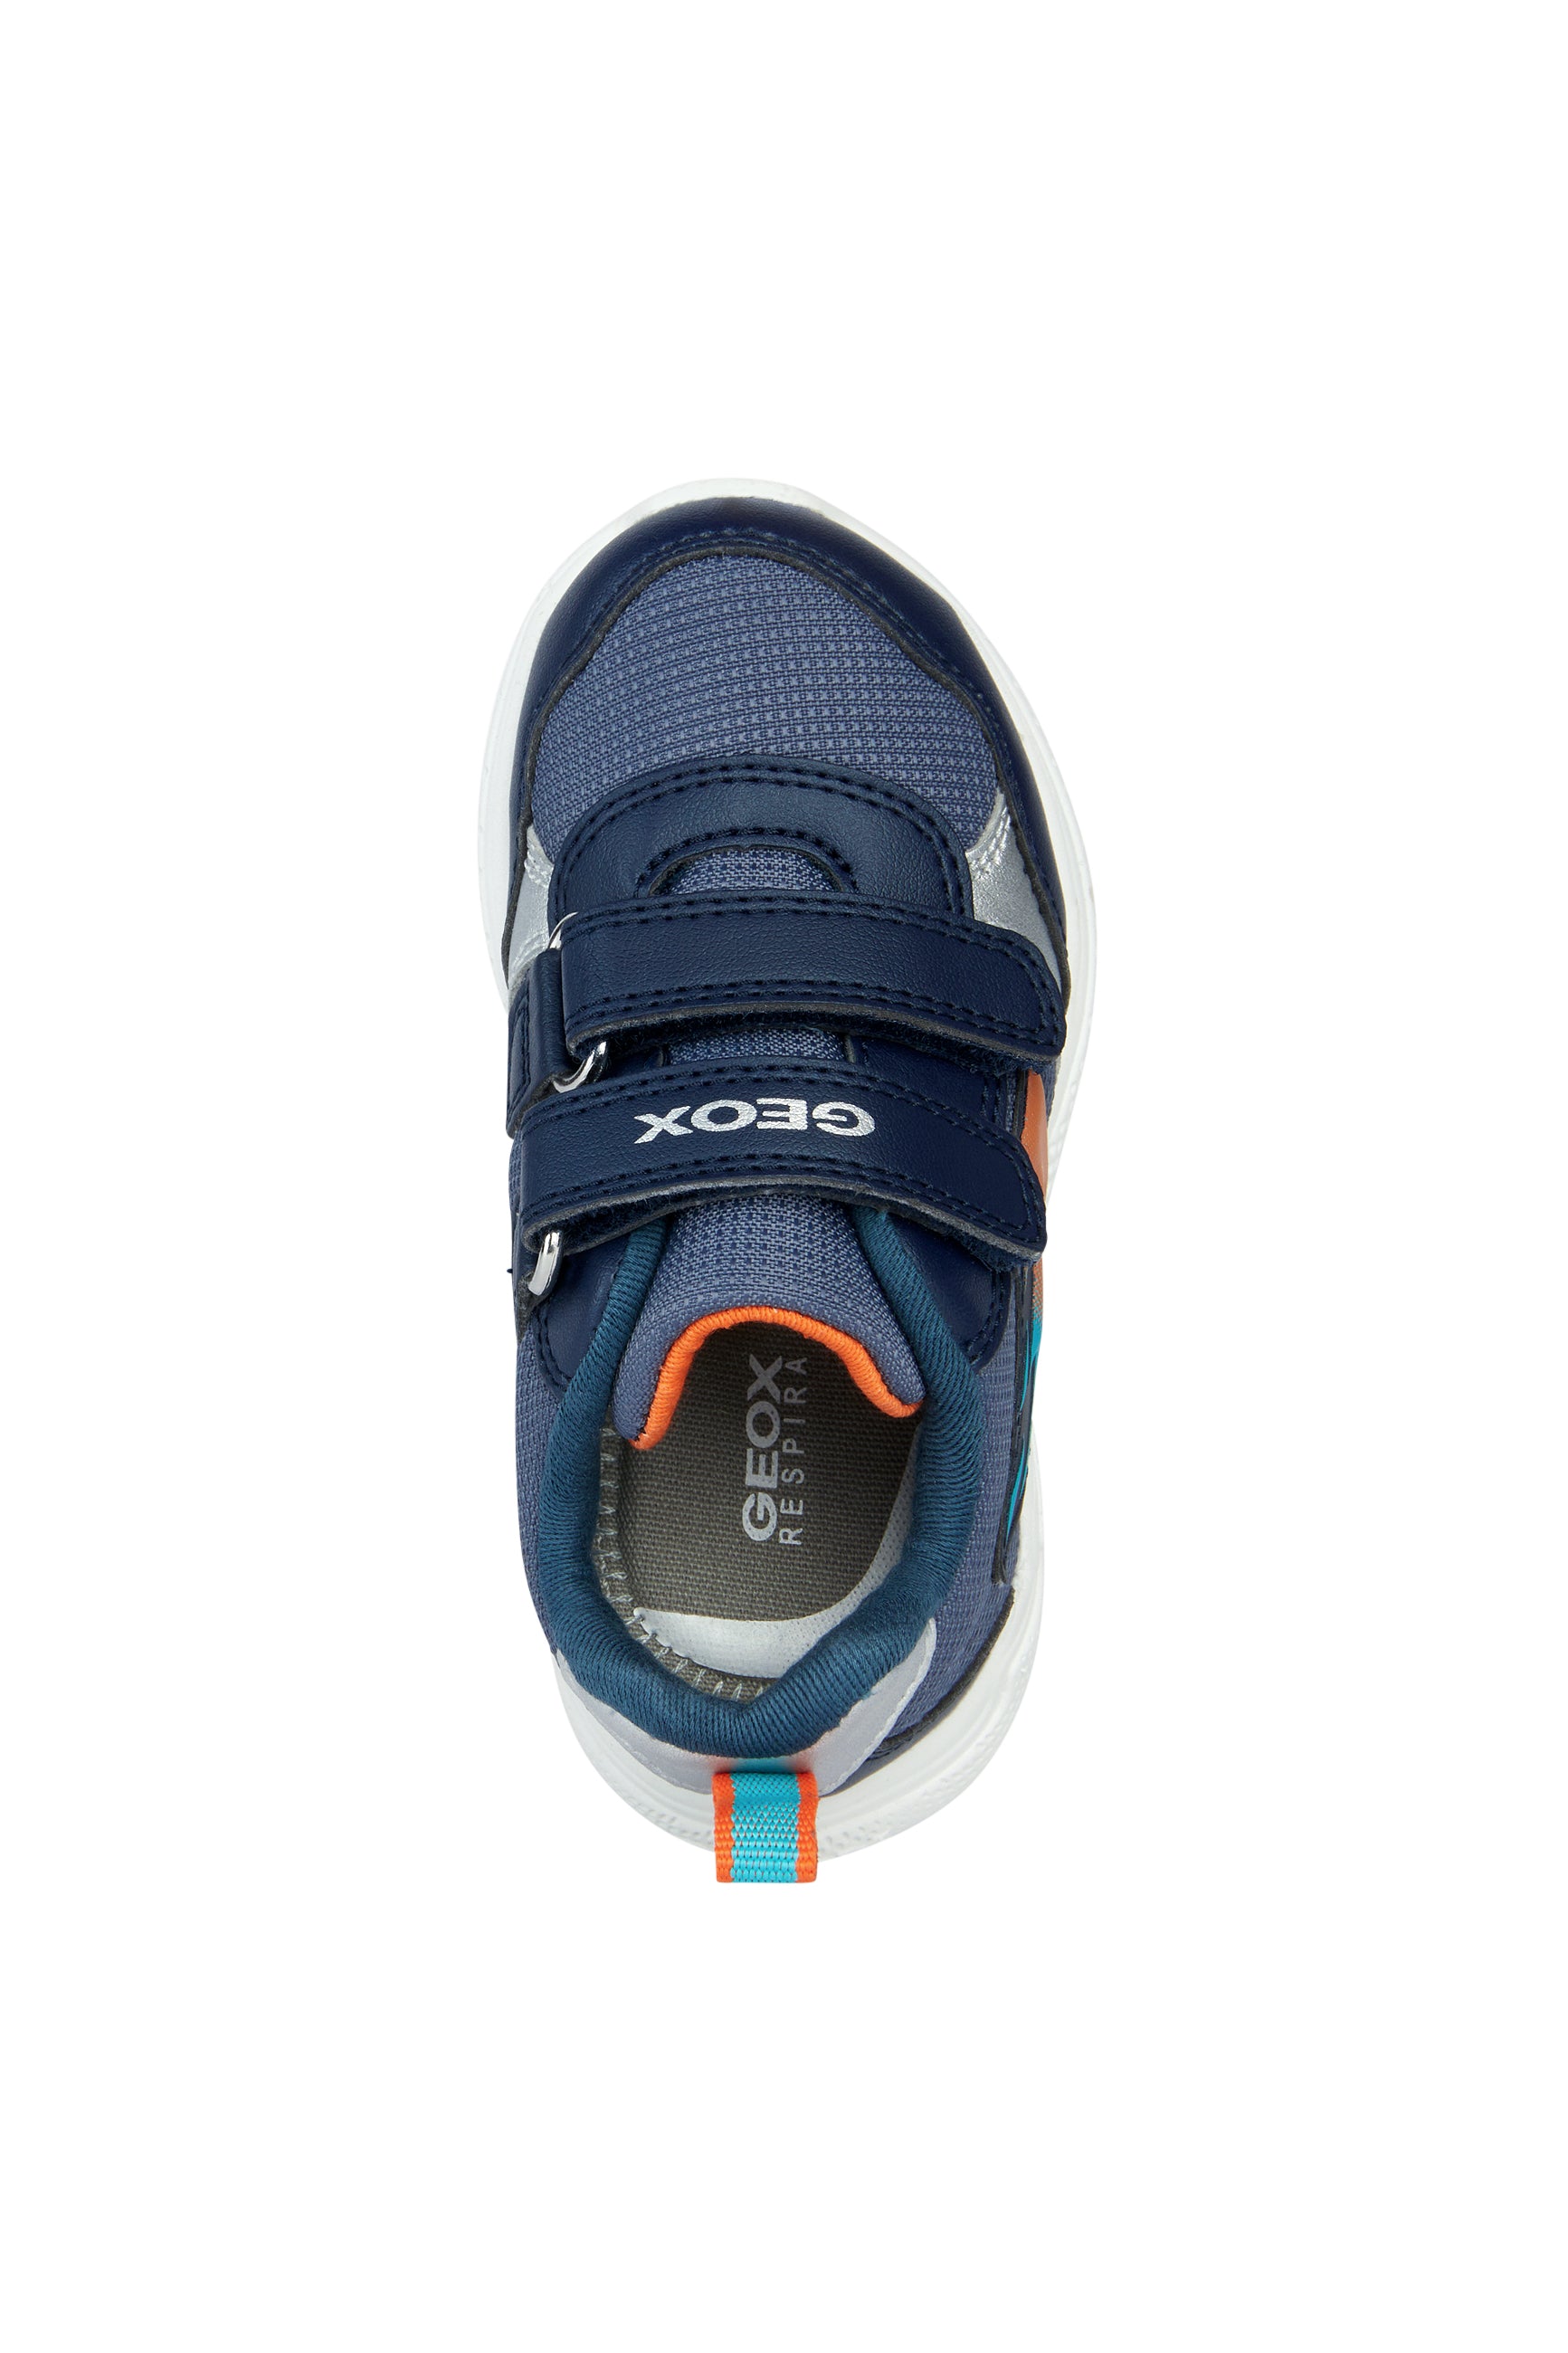 A boys trainer by Geox, style Sprintye, in navy and orange with double velcro fastening. Above view.